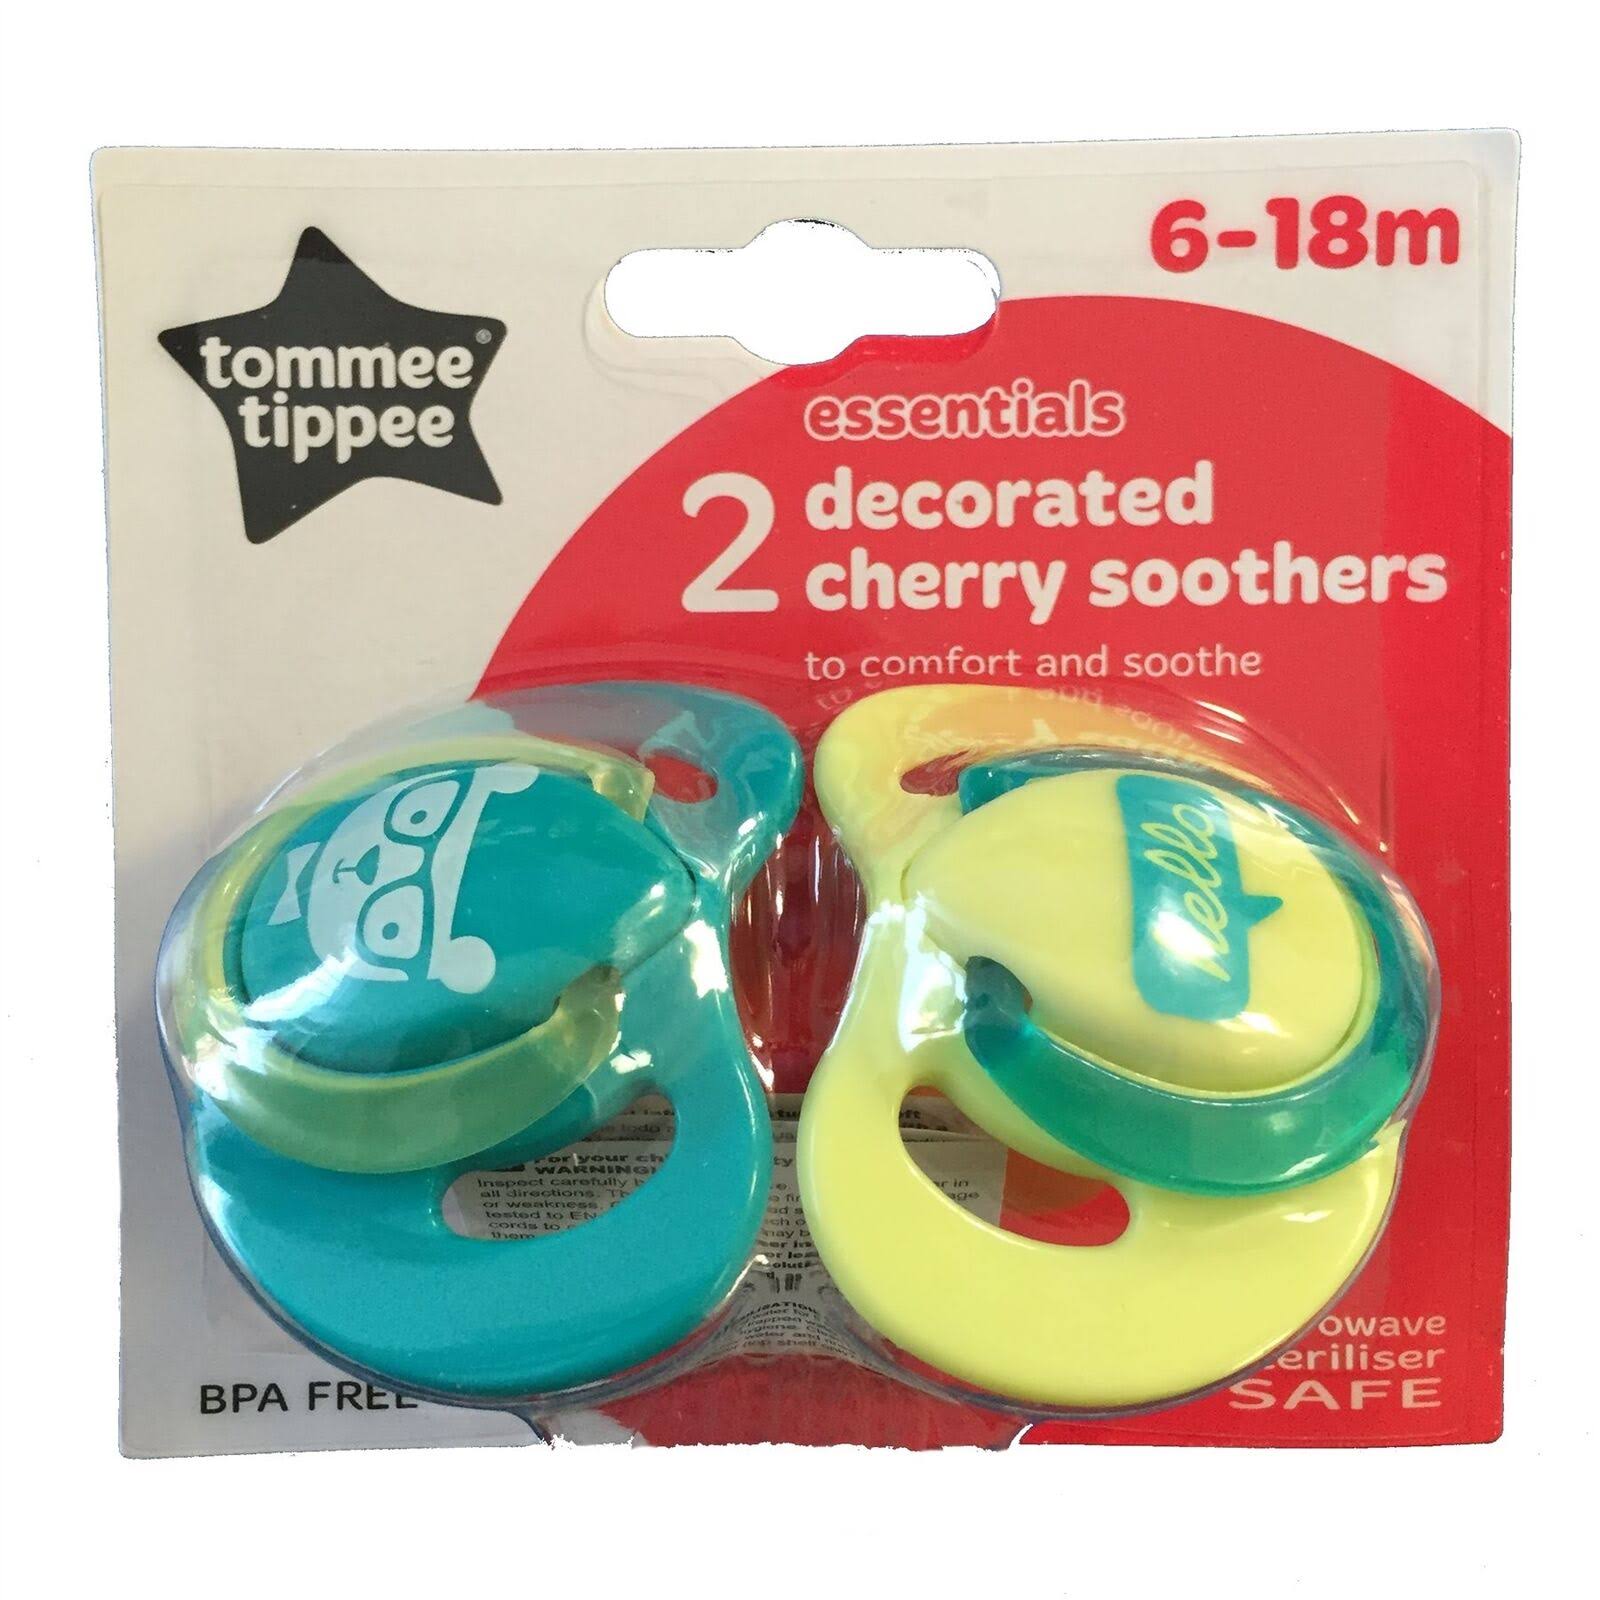 Tommee Tippee Decorated Cherry Soothers Pack - 2pk, 6 to 18m